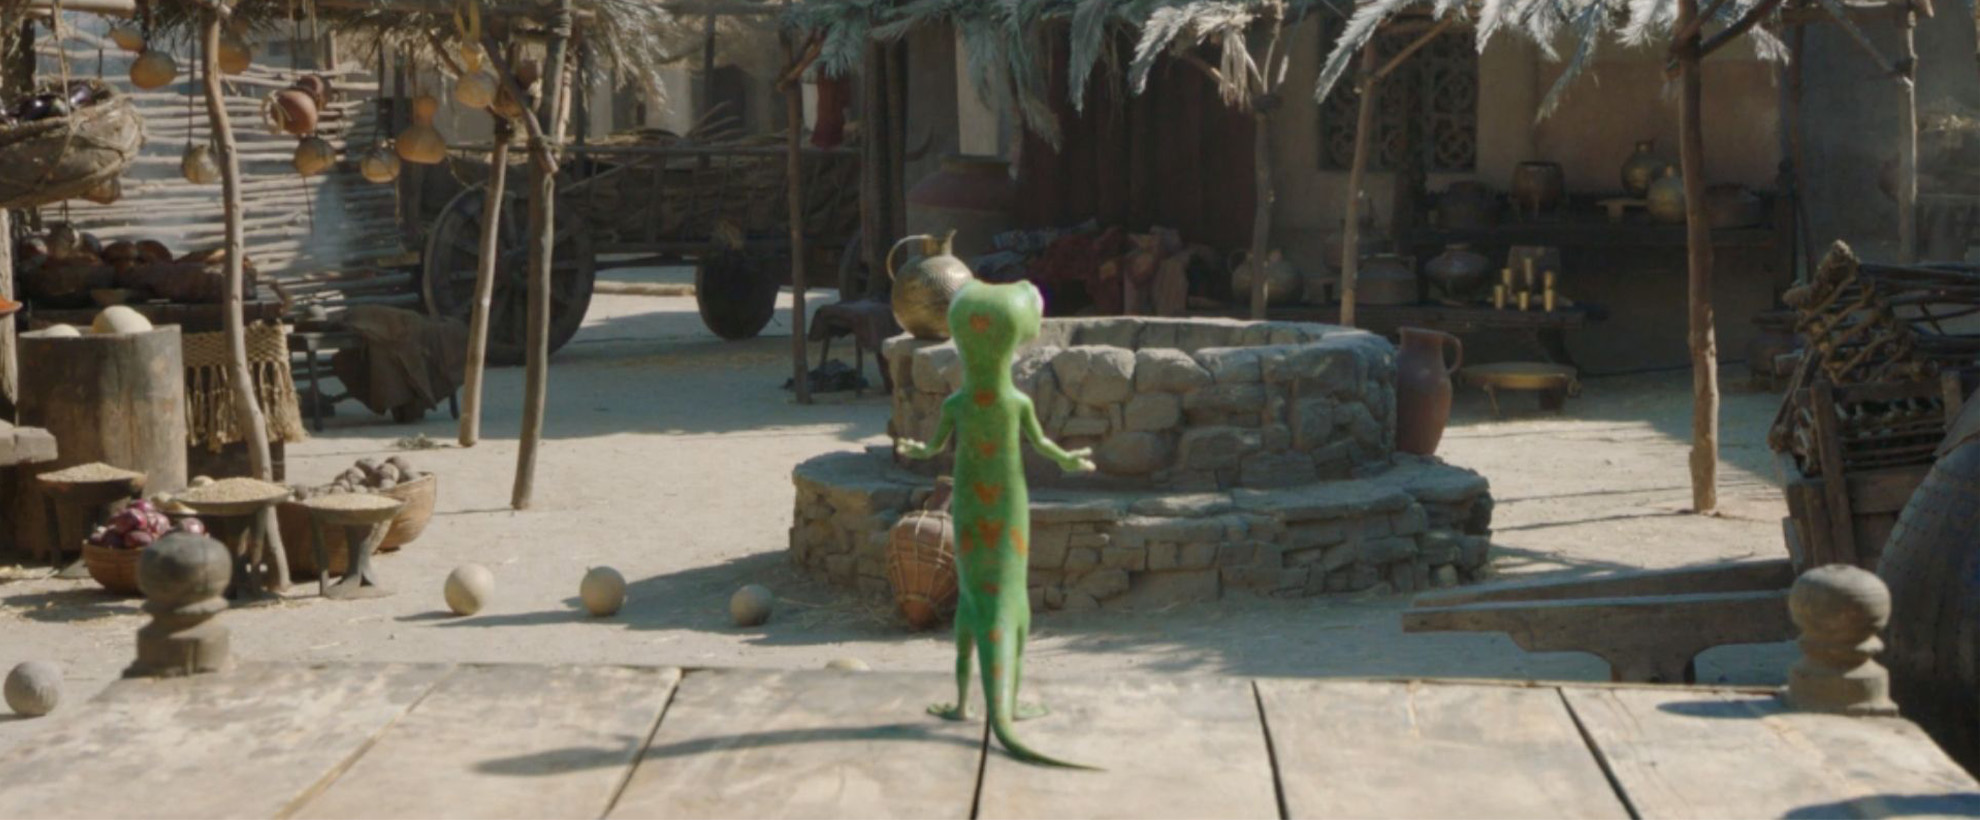 The GEICO gecko stood in front of a well in a market area.